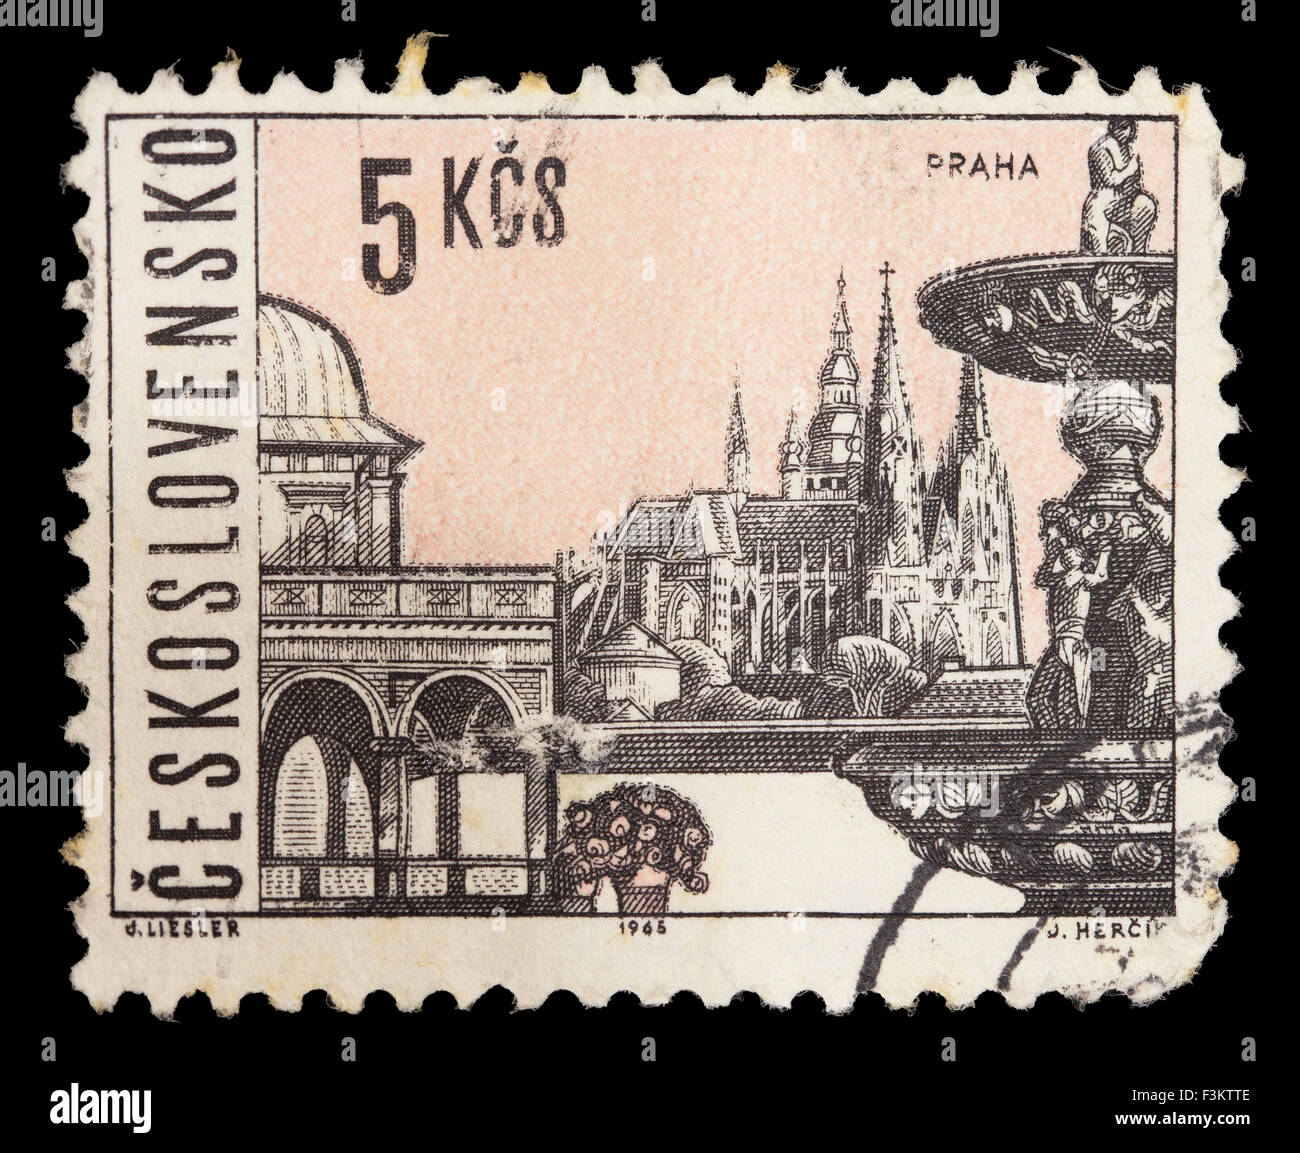 CZECHOSLOVAKIA - CIRCA 1965: A postage stamp printed in Czechoslovakia shows historical UNESCO World Heritage Sites in Prague Stock Photo